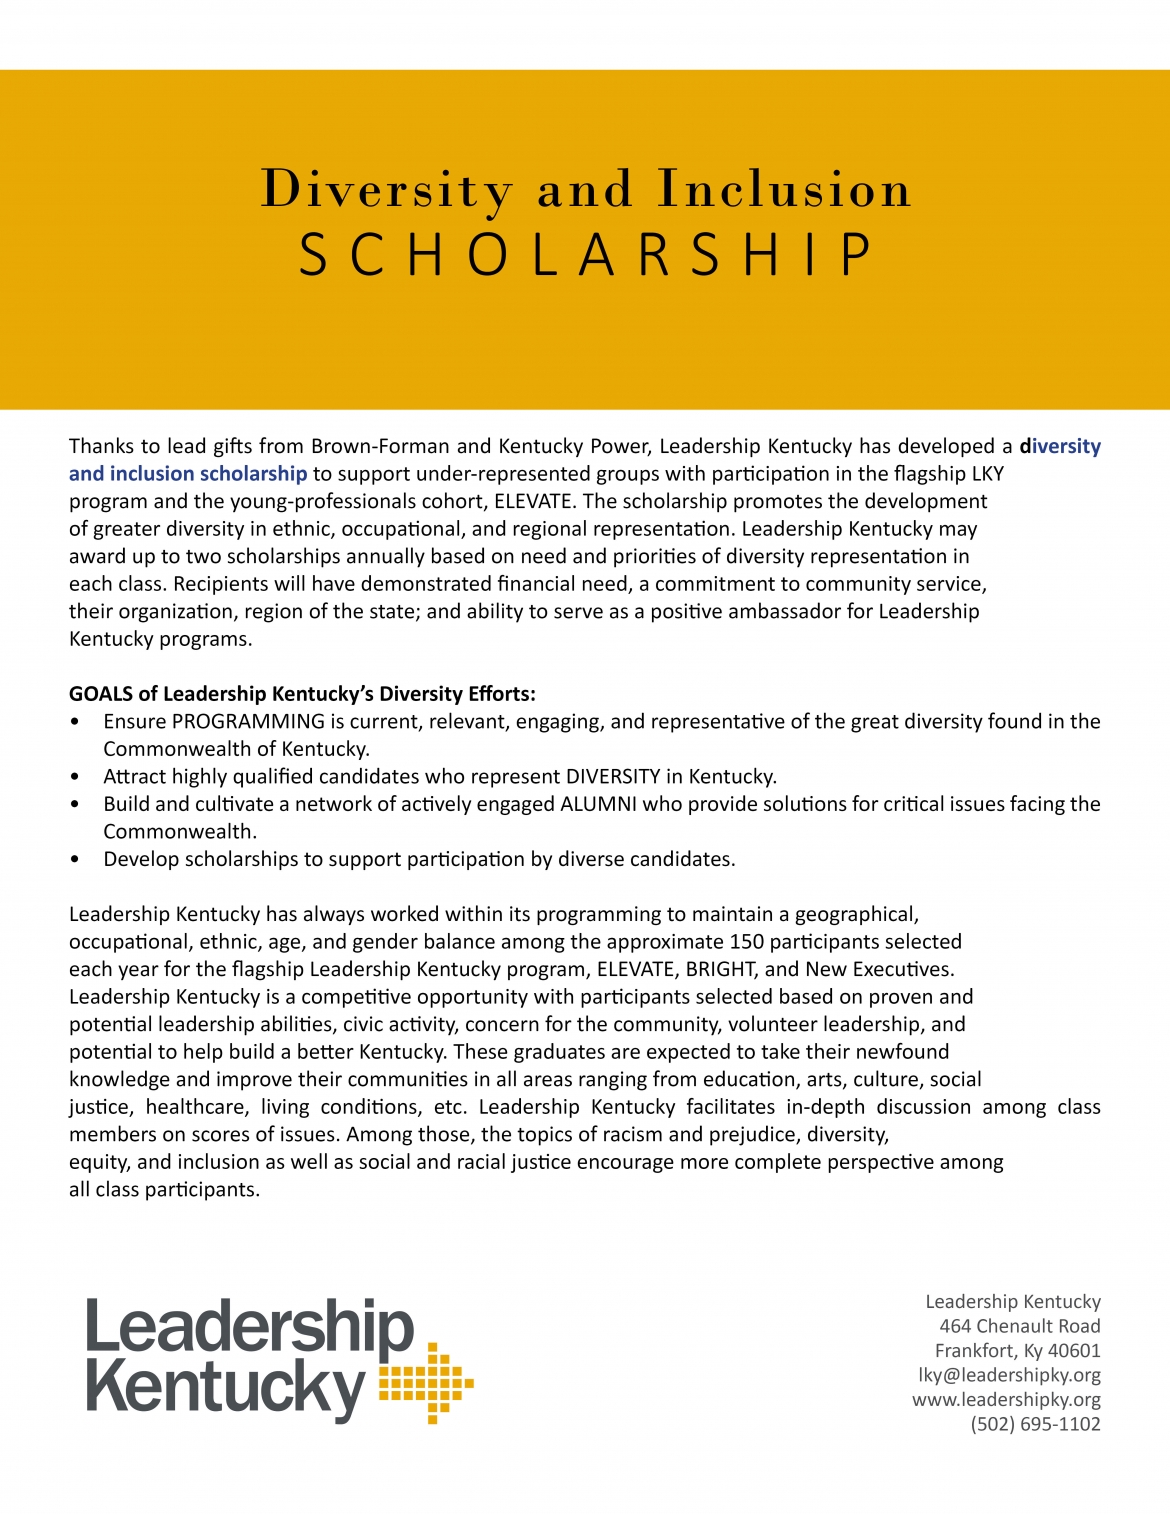 Diversity and Inclusion Scholarship